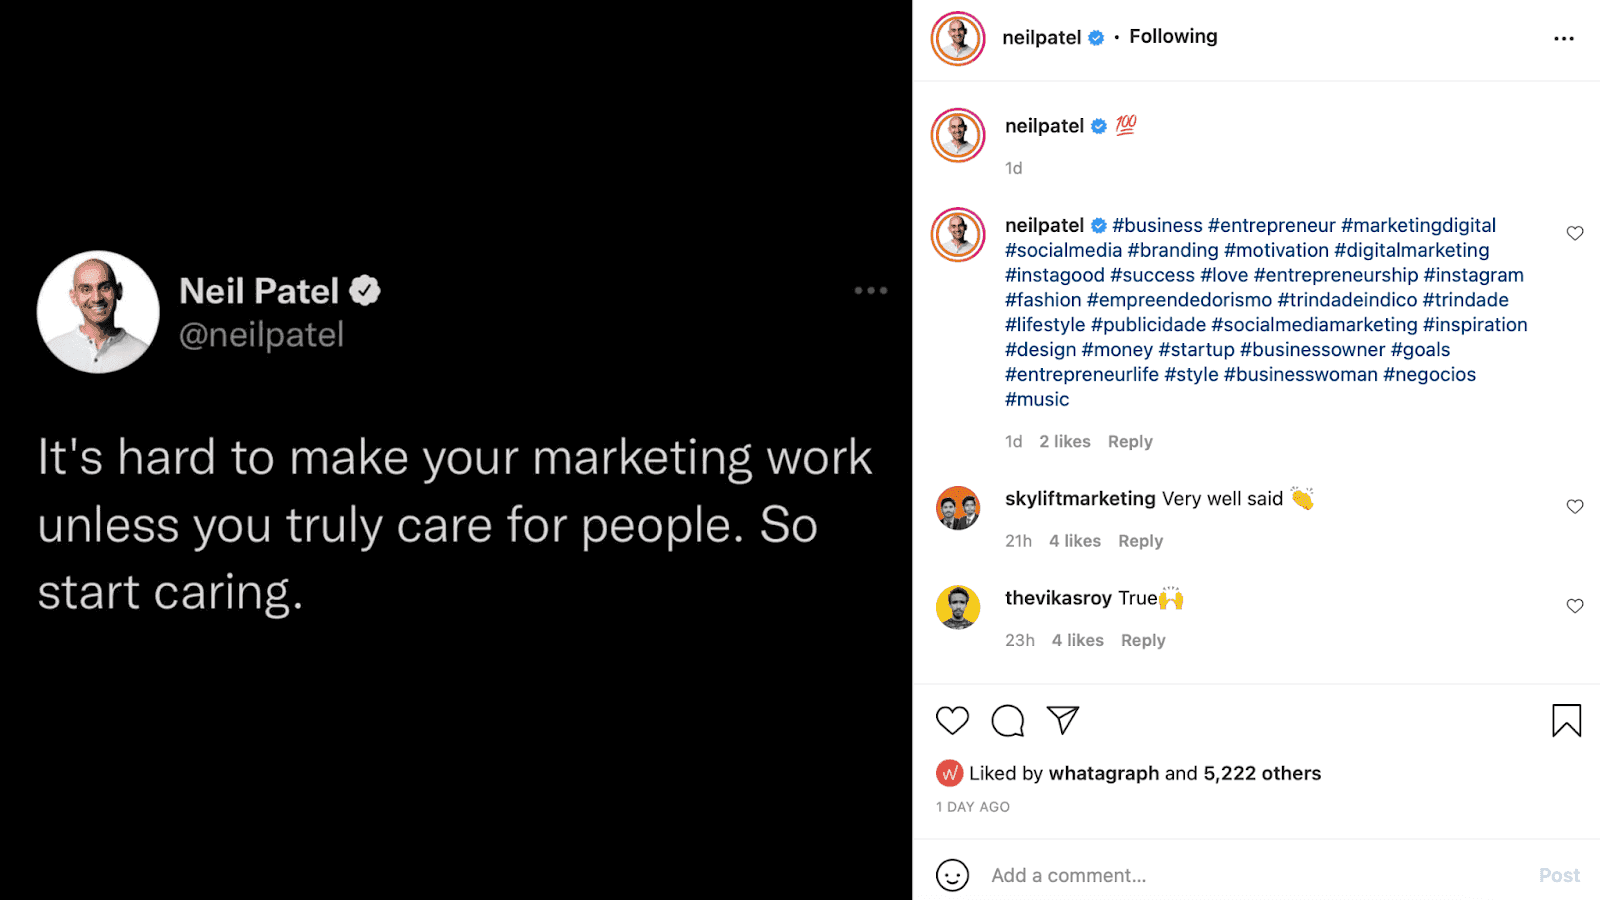 An Instagram post from Neil Patel quoting a tweet he wrote